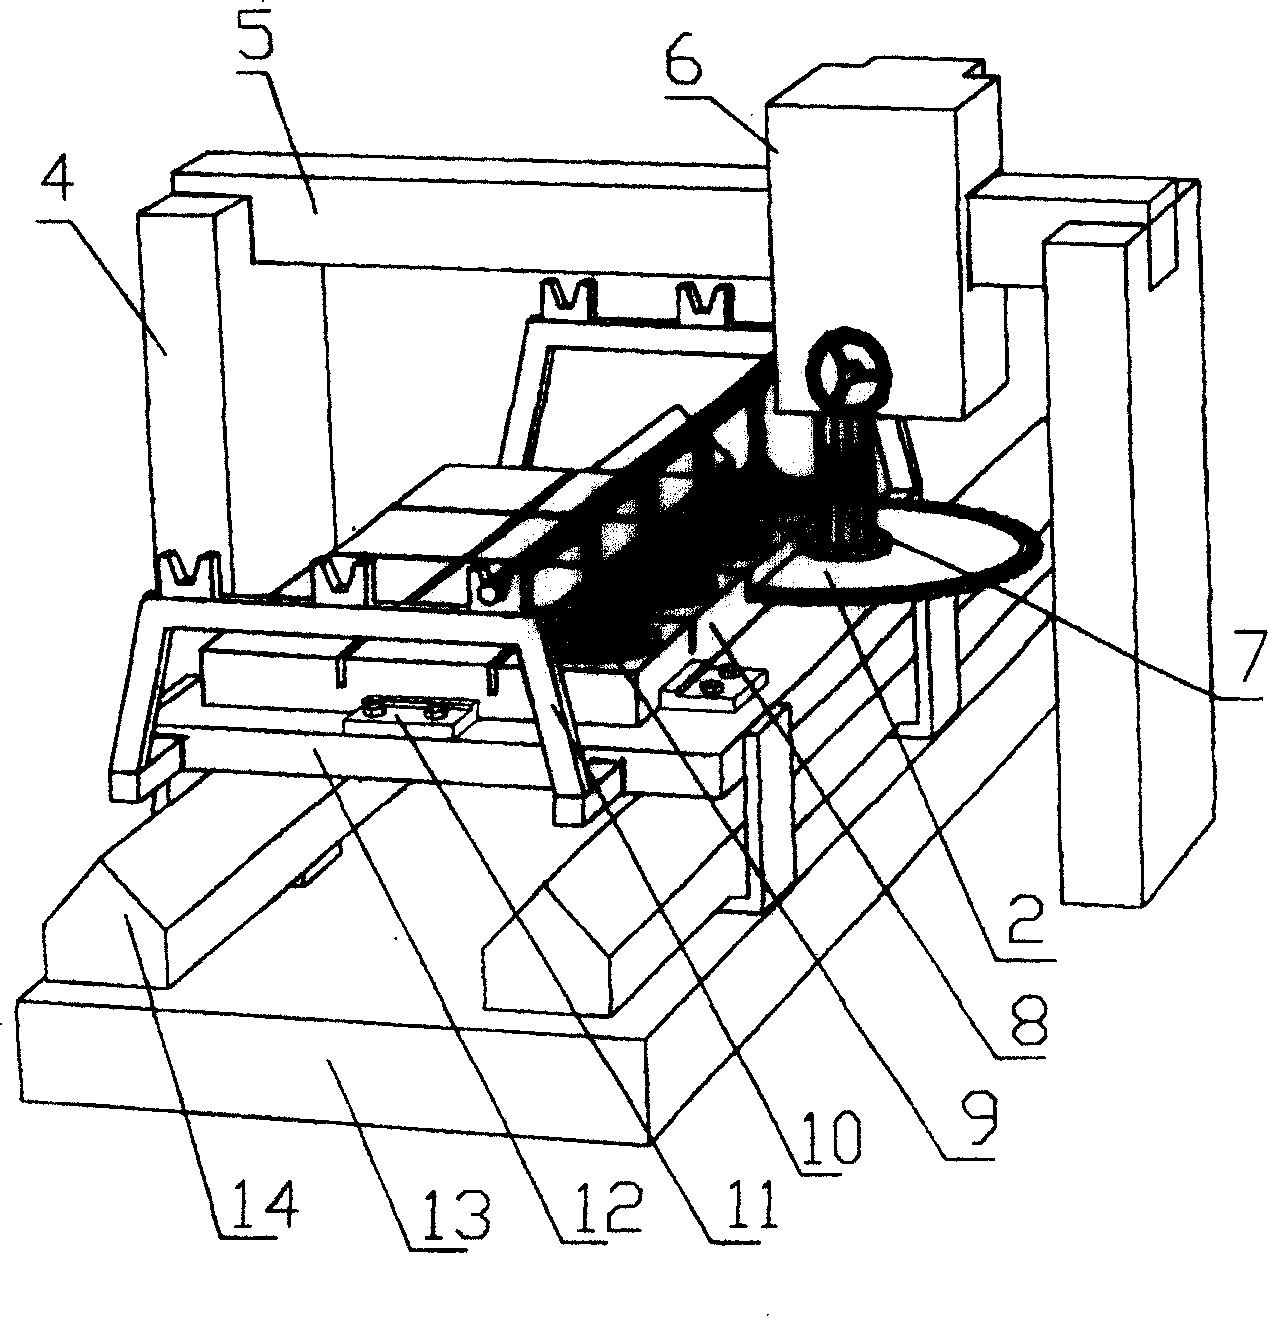 Method for cutting ultrathin dimension stone in large specification by using small circular saw blade